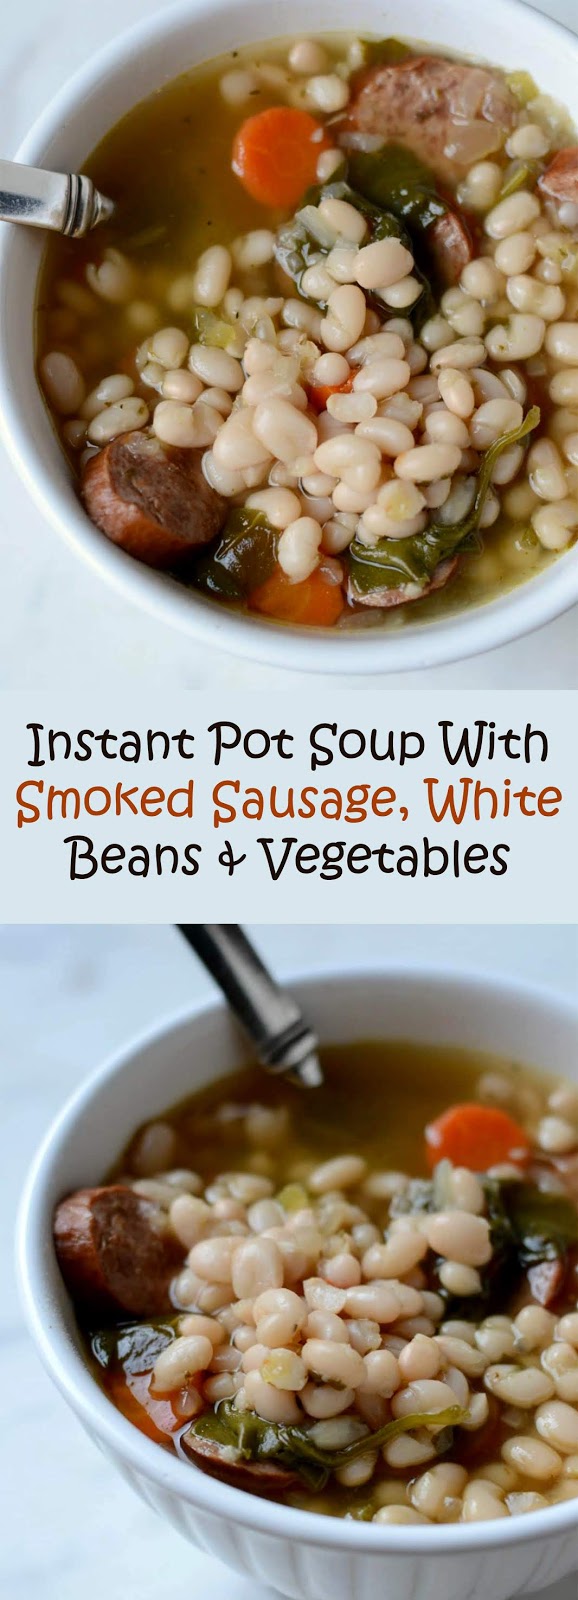 Instant Pot Soup With Smoked Sausage, White Beans & Vegetables - Me Tasty